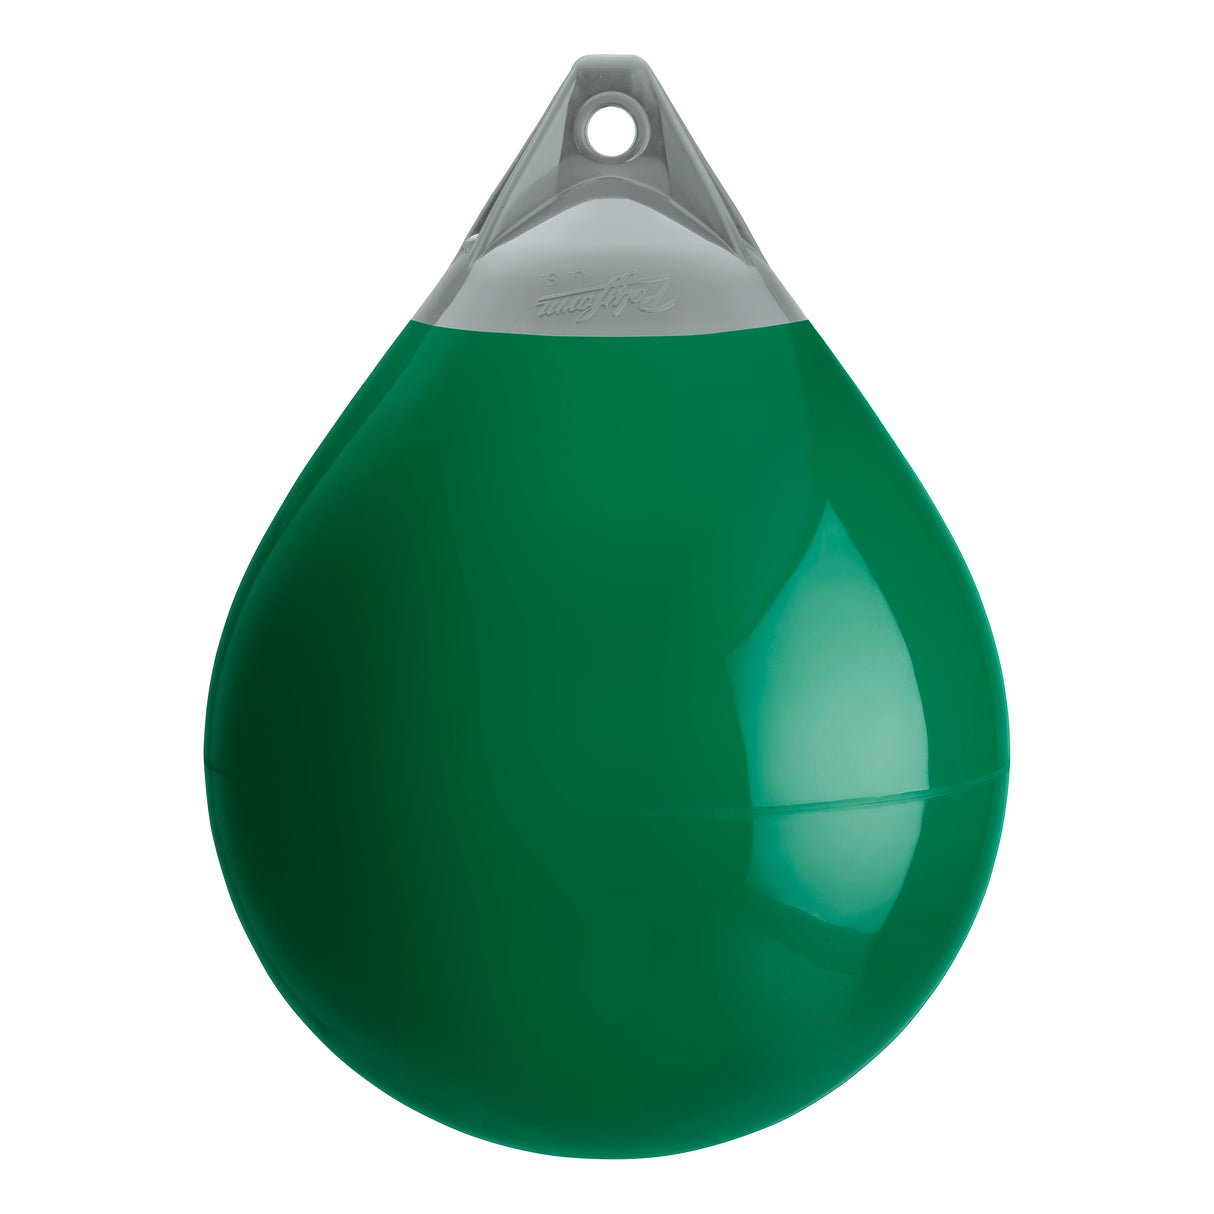 Forest Green buoy with Grey-Top, Polyform A-4